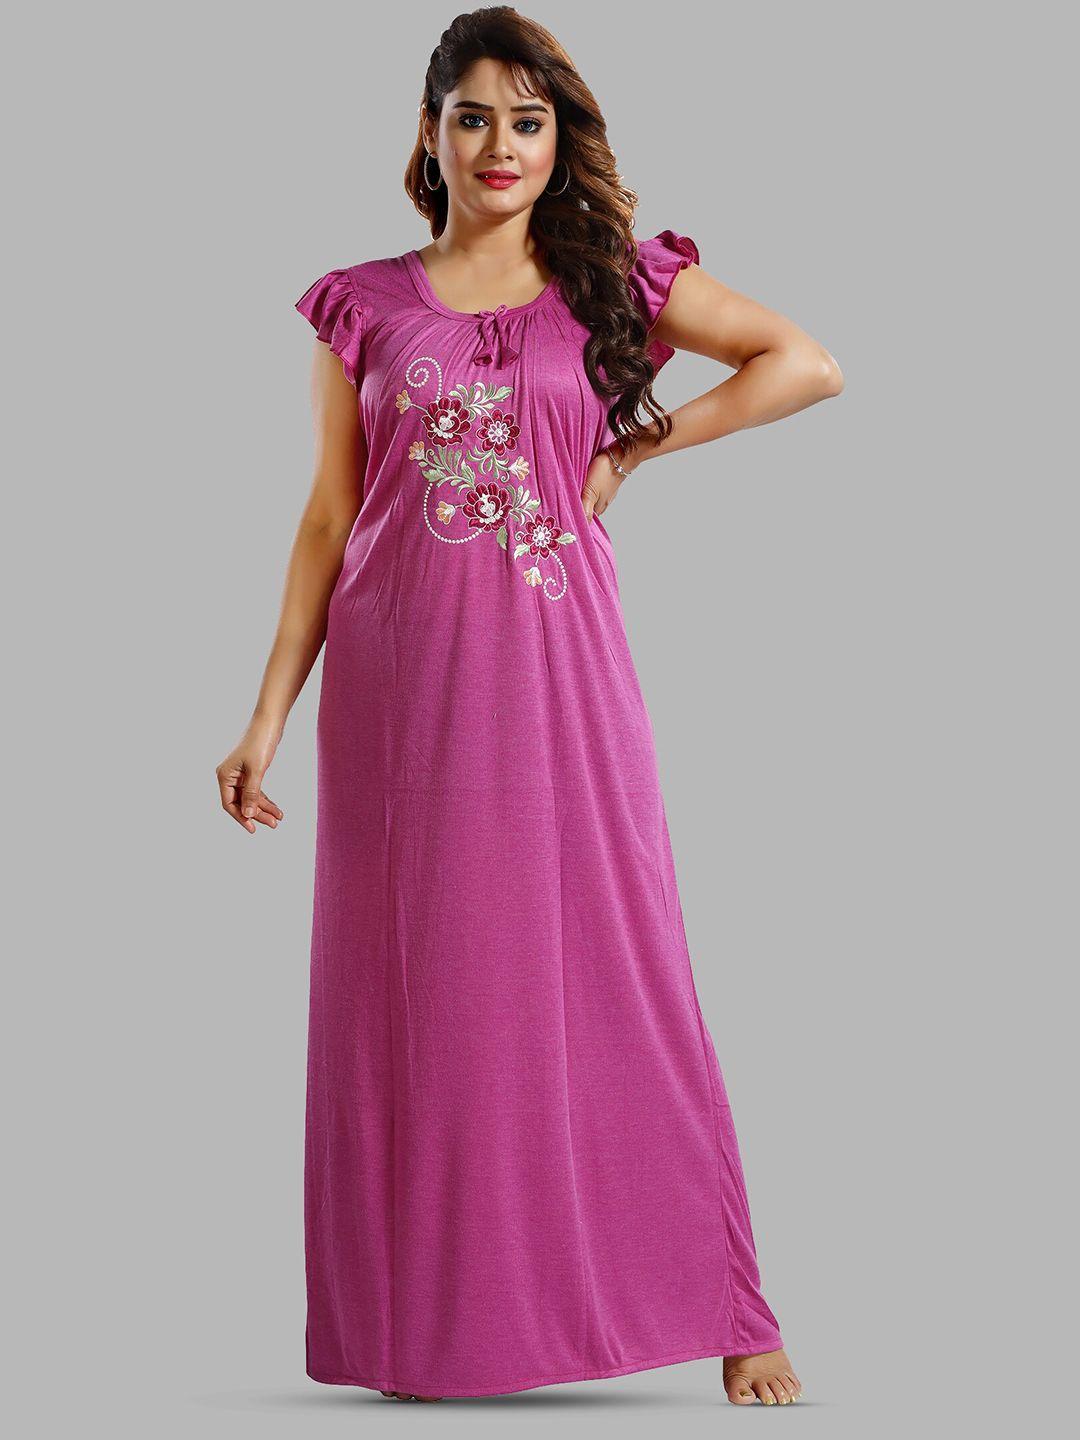 fomti-floral-embroidered-maxi-nightdress